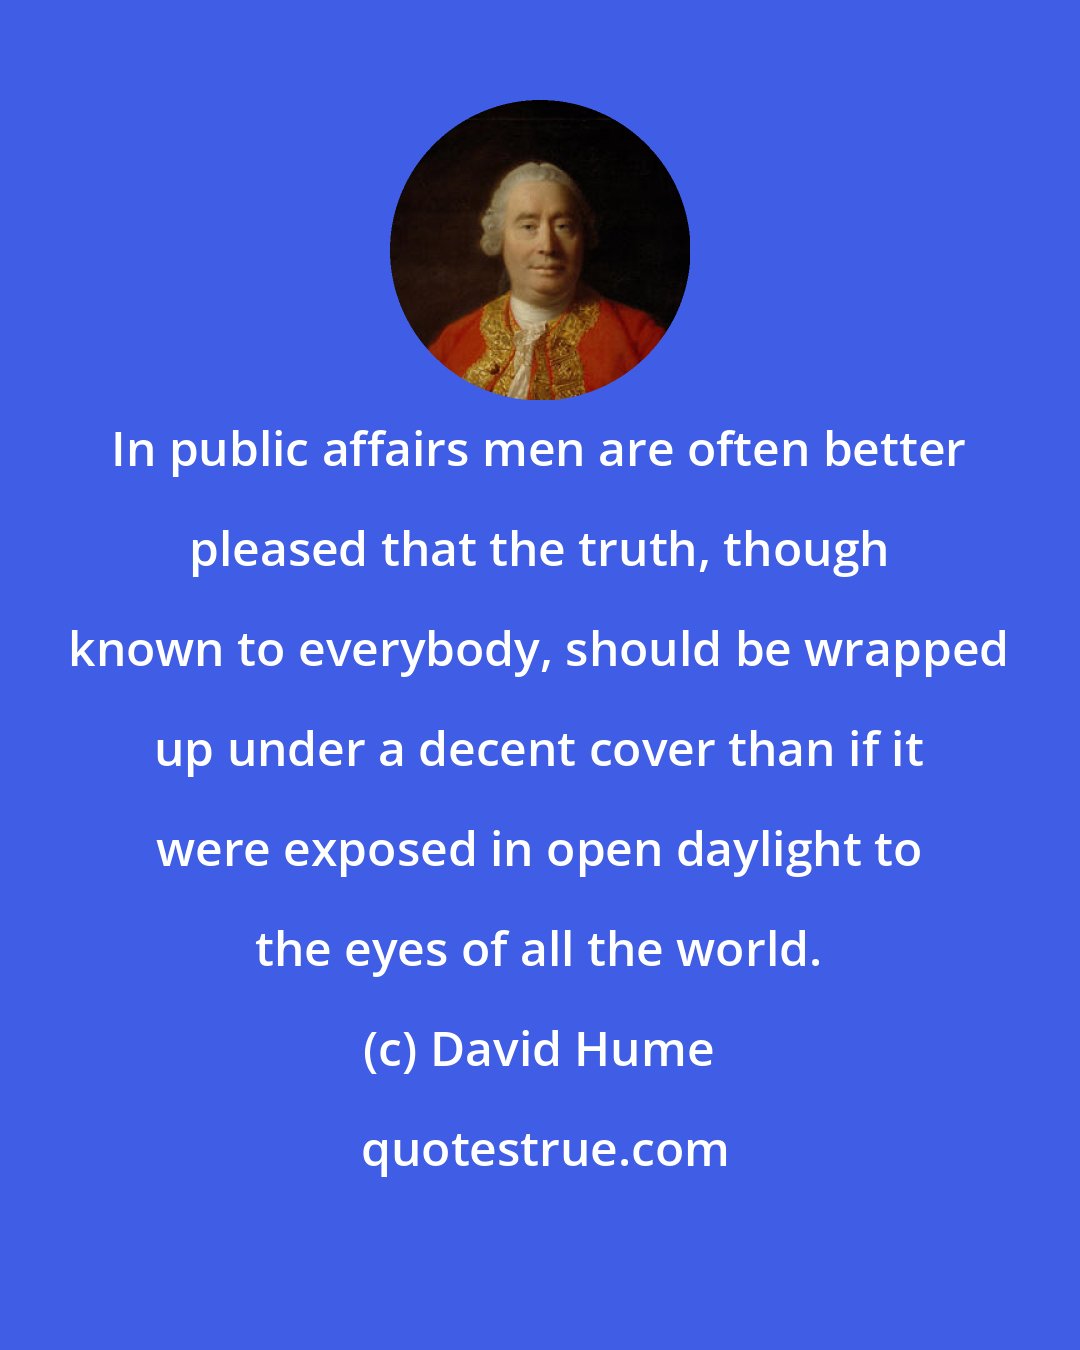 David Hume: In public affairs men are often better pleased that the truth, though known to everybody, should be wrapped up under a decent cover than if it were exposed in open daylight to the eyes of all the world.